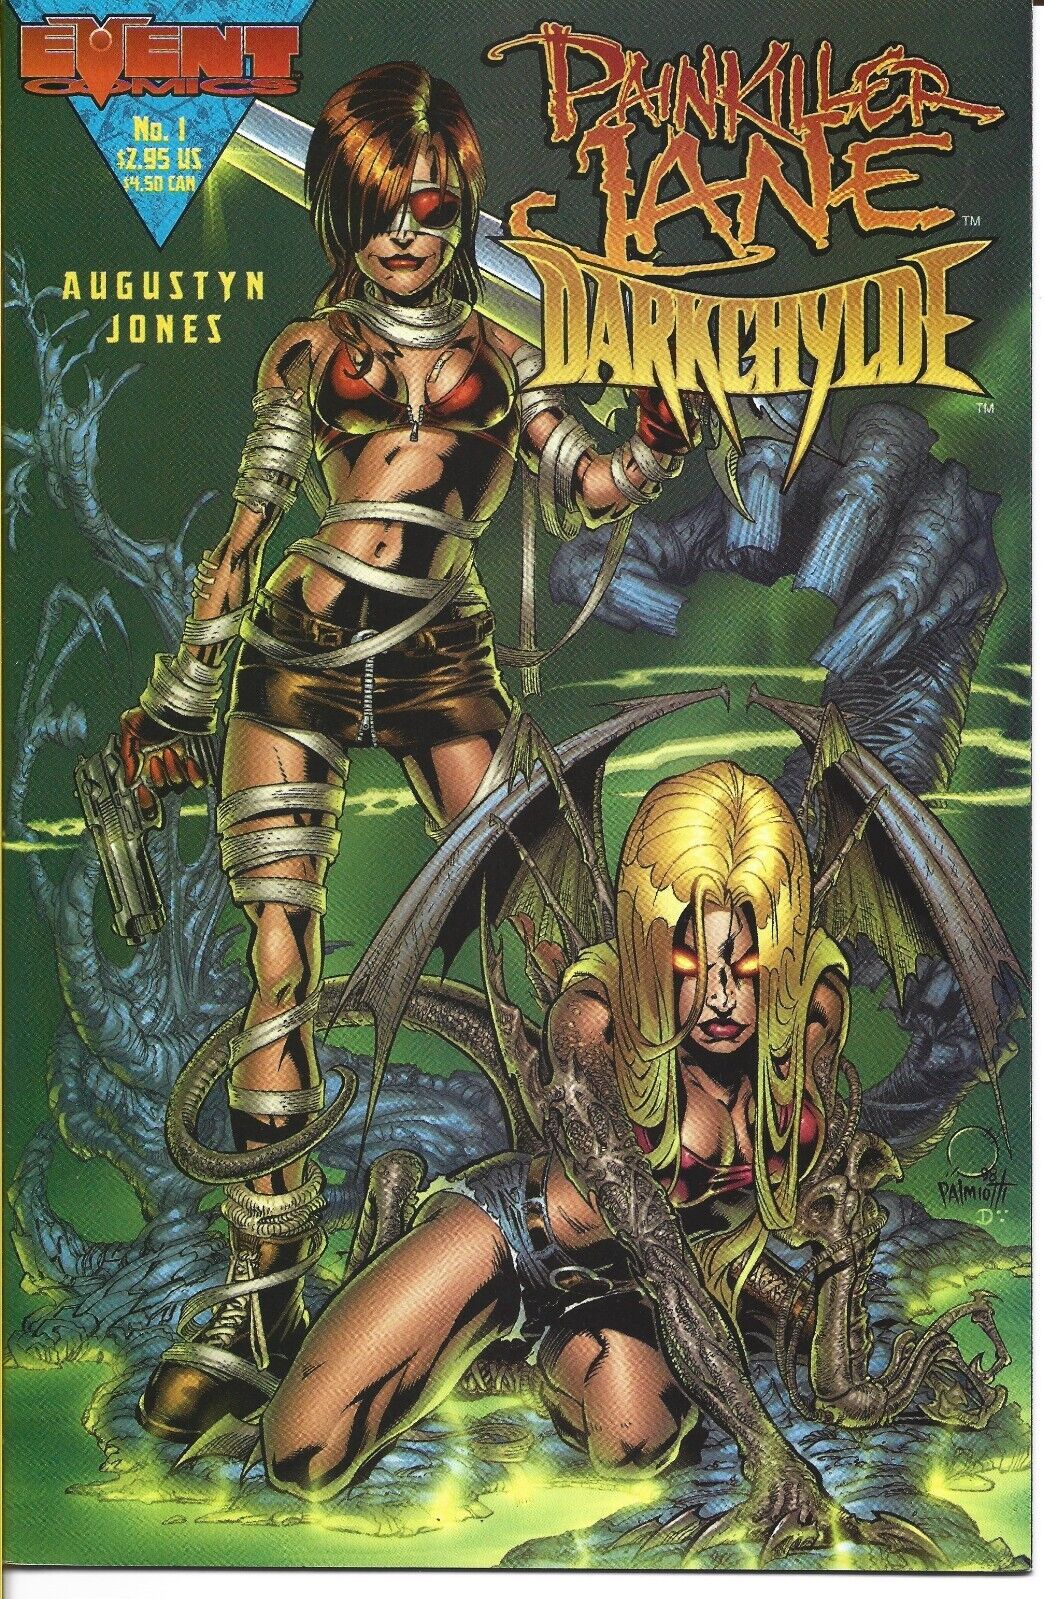 PAINKILLER JANE DARKCHYLDE #1 COVER B EVENT COMICS 1998 BAGGED AND BOARDED